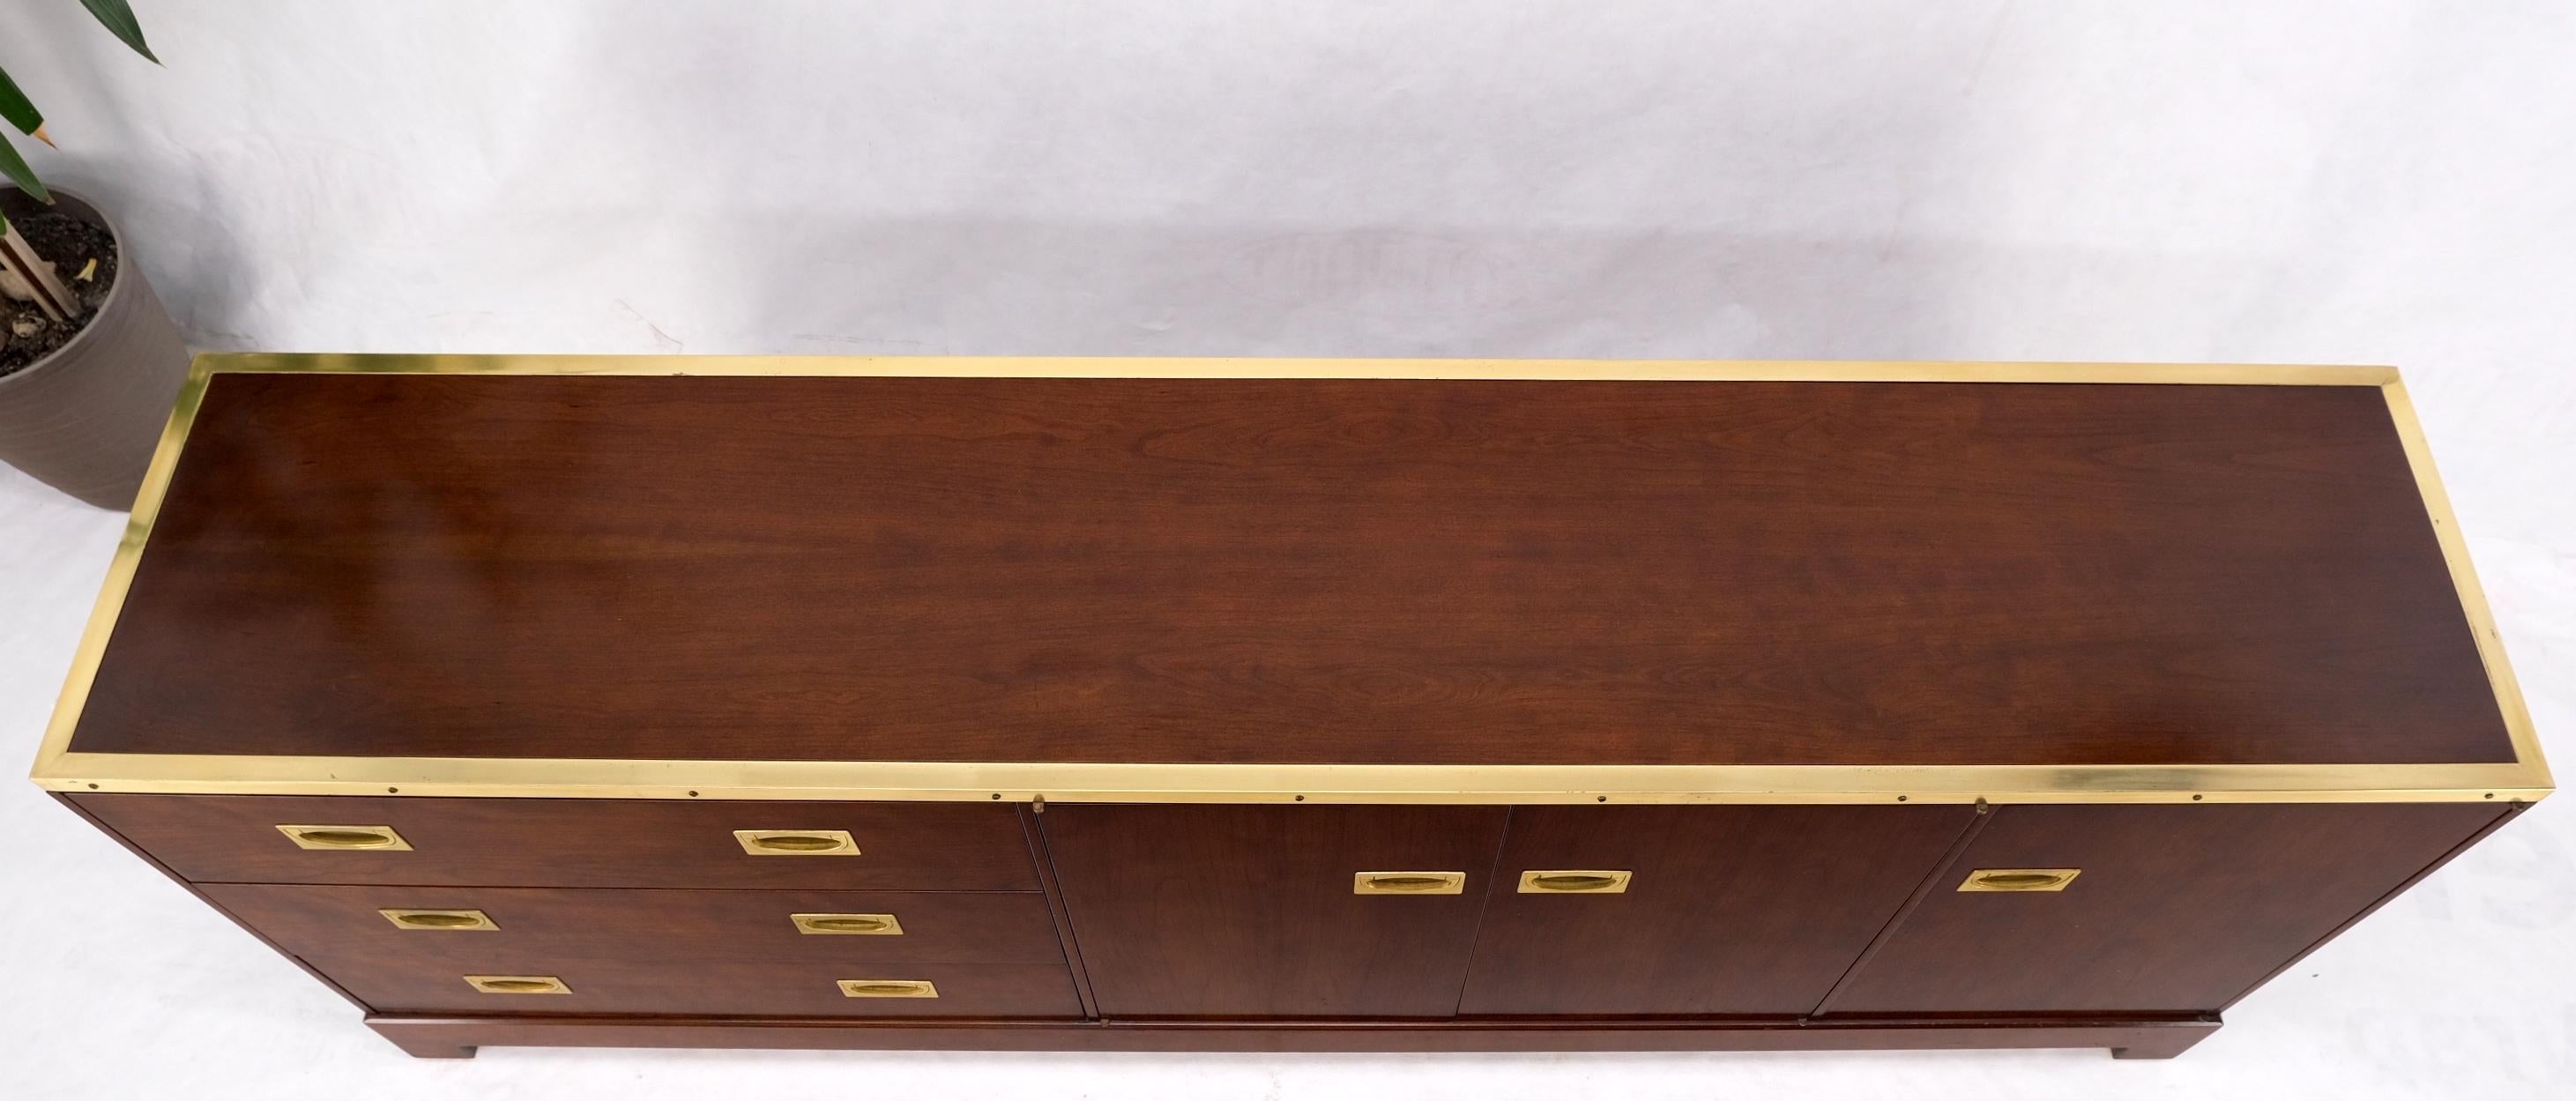 Campaign Style Brass Walnut Mid Century Drawers Doors Compartment Long Credenza  For Sale 7